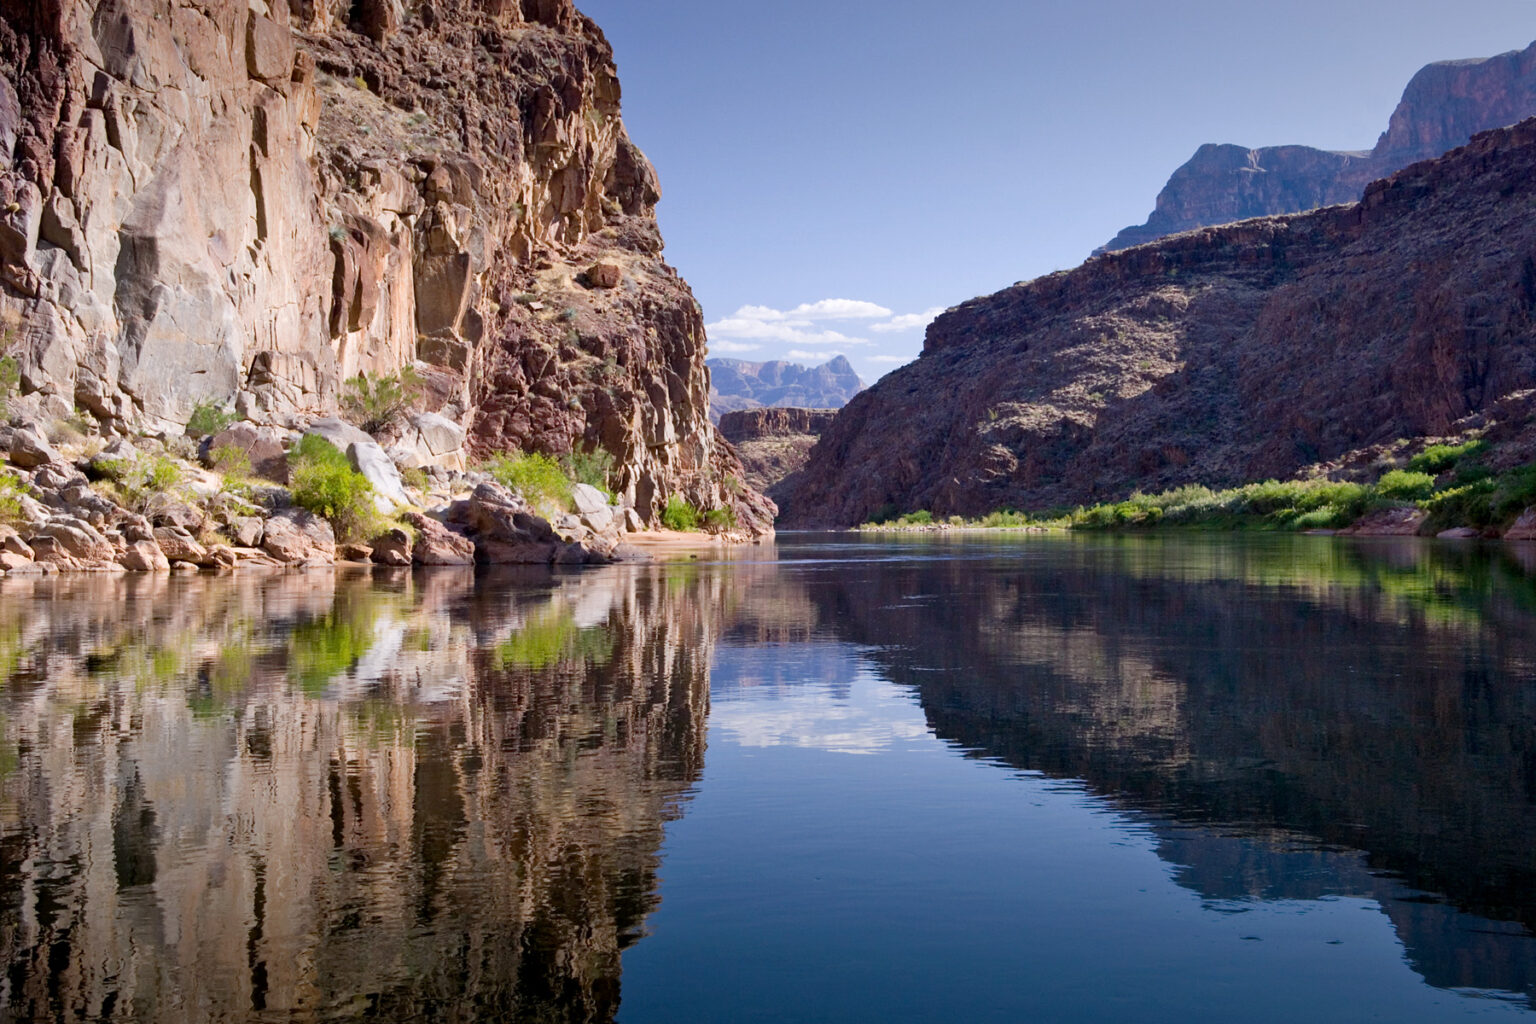 Sky reflected in calm waters of Colorado River in Grand Canyon